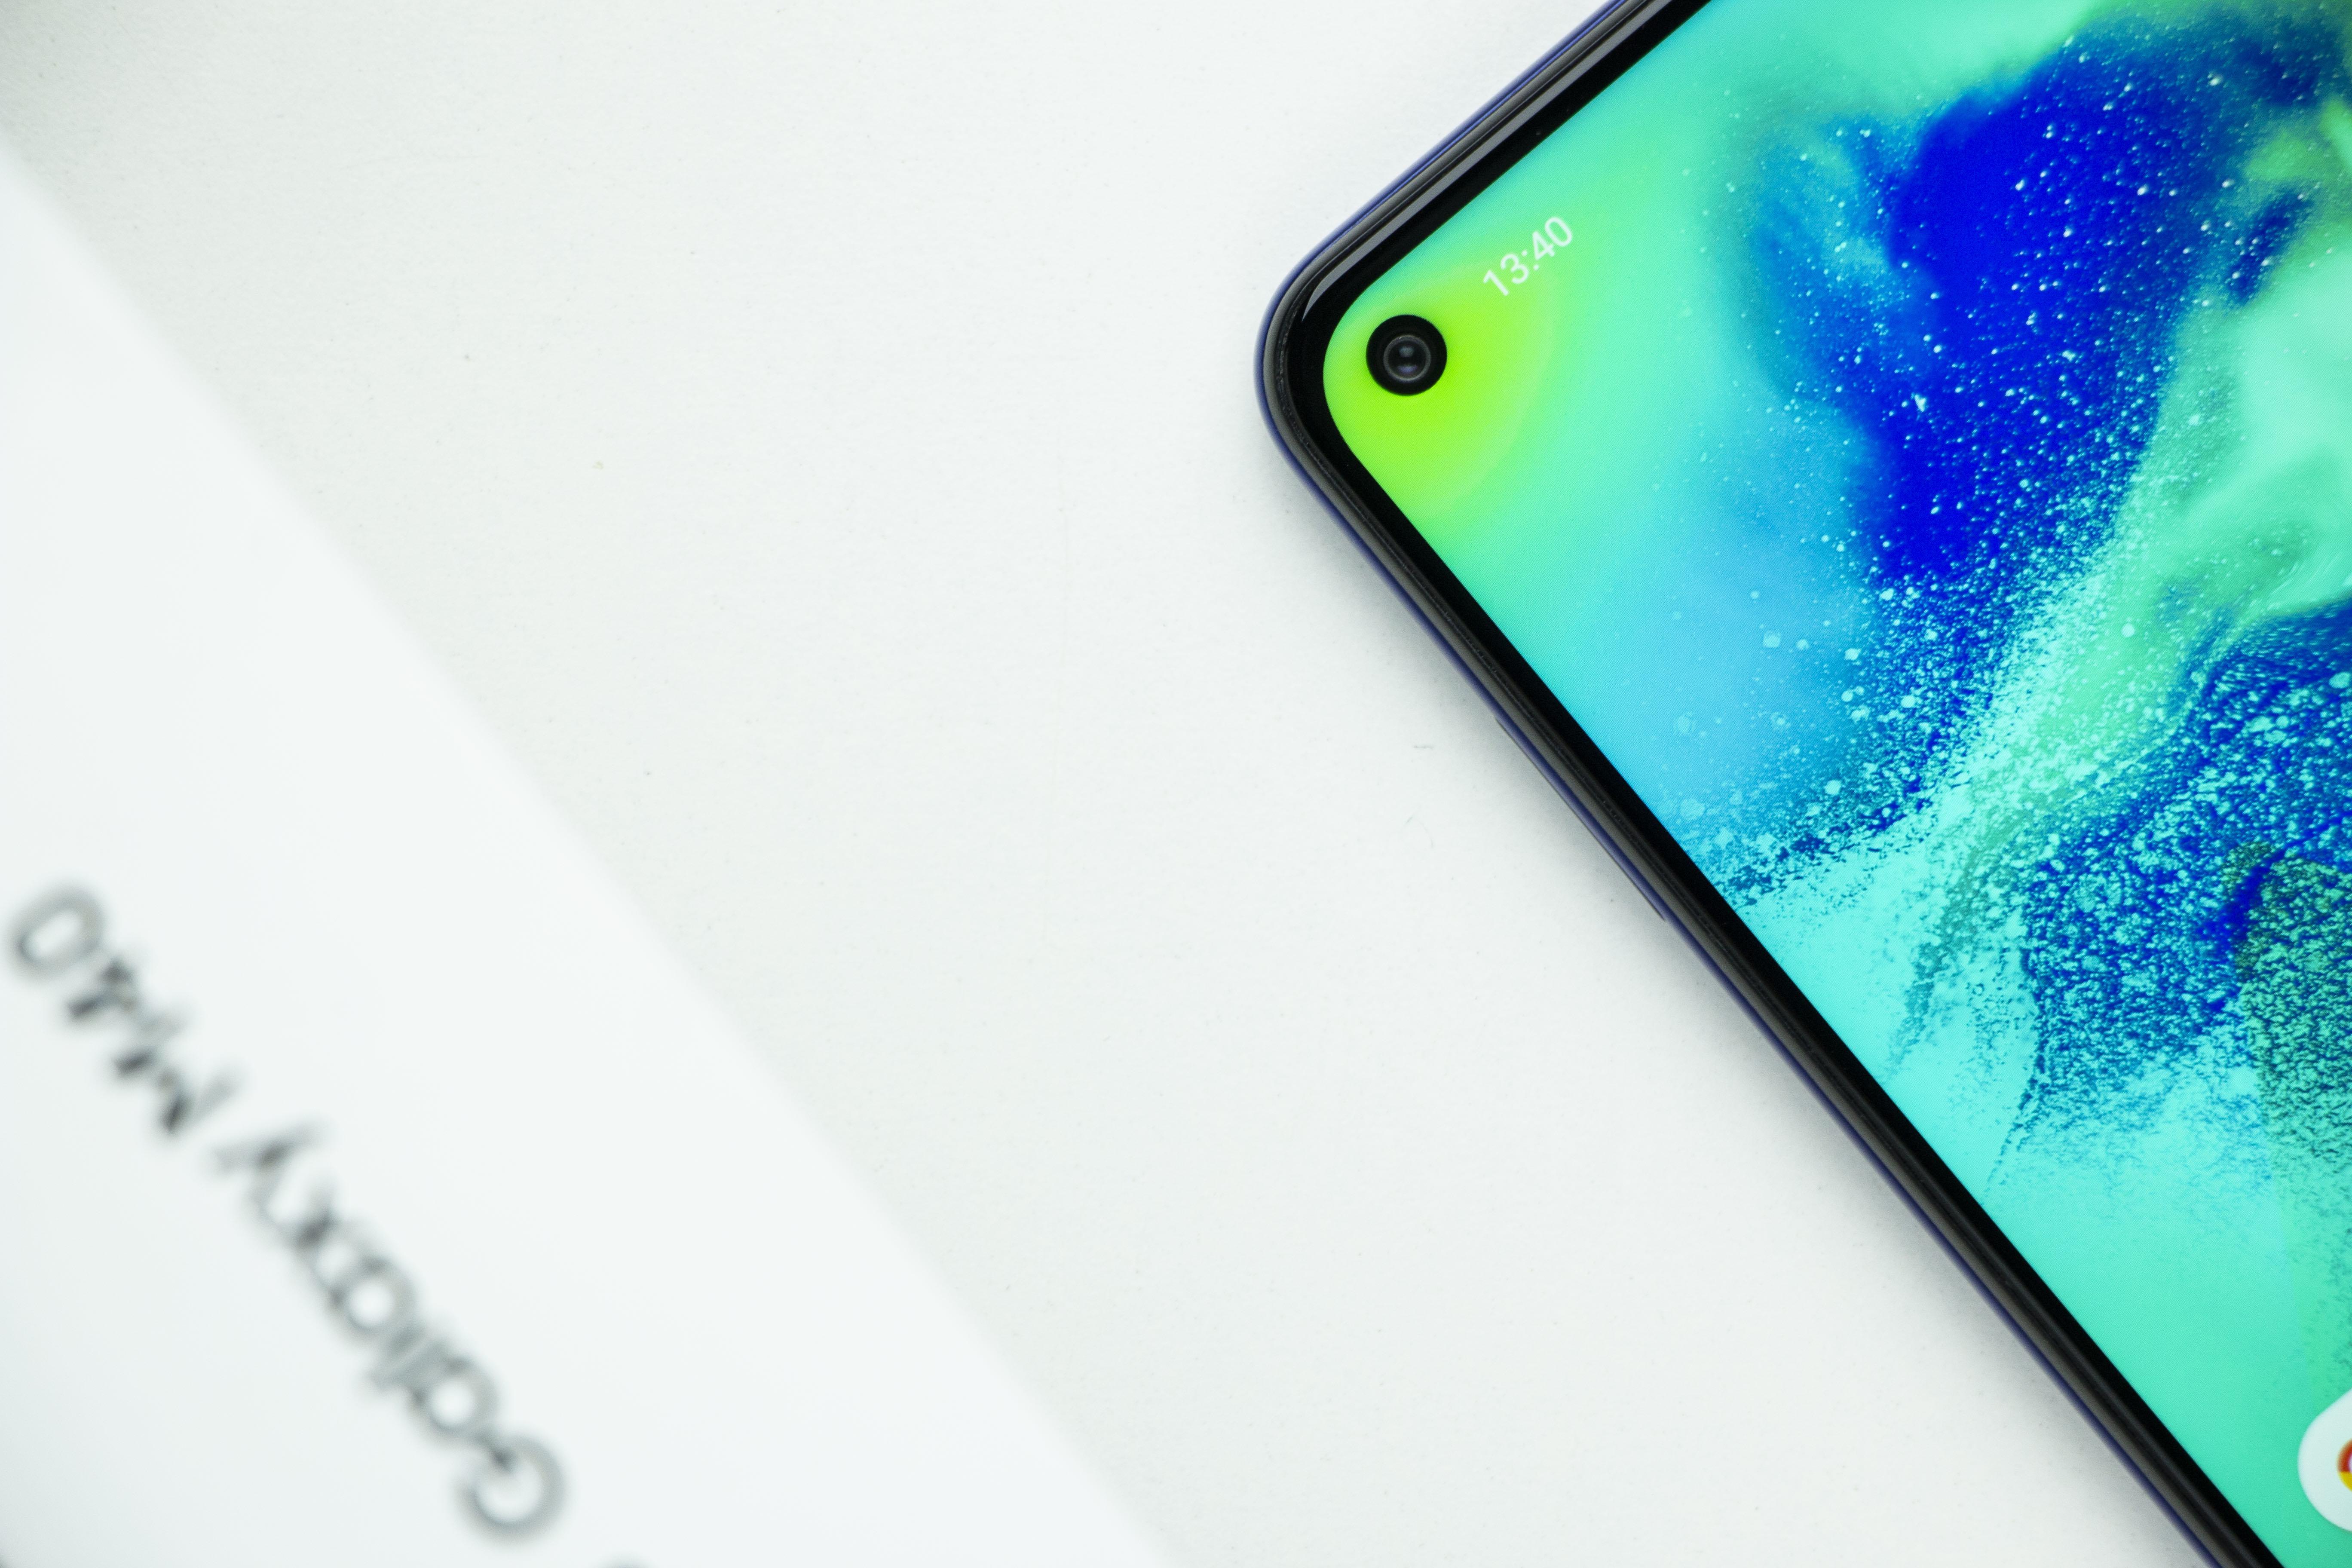 Samsung Galaxy M40 confirmed to come with 32MP primary camera, punch-hole  display with 16MP front camera